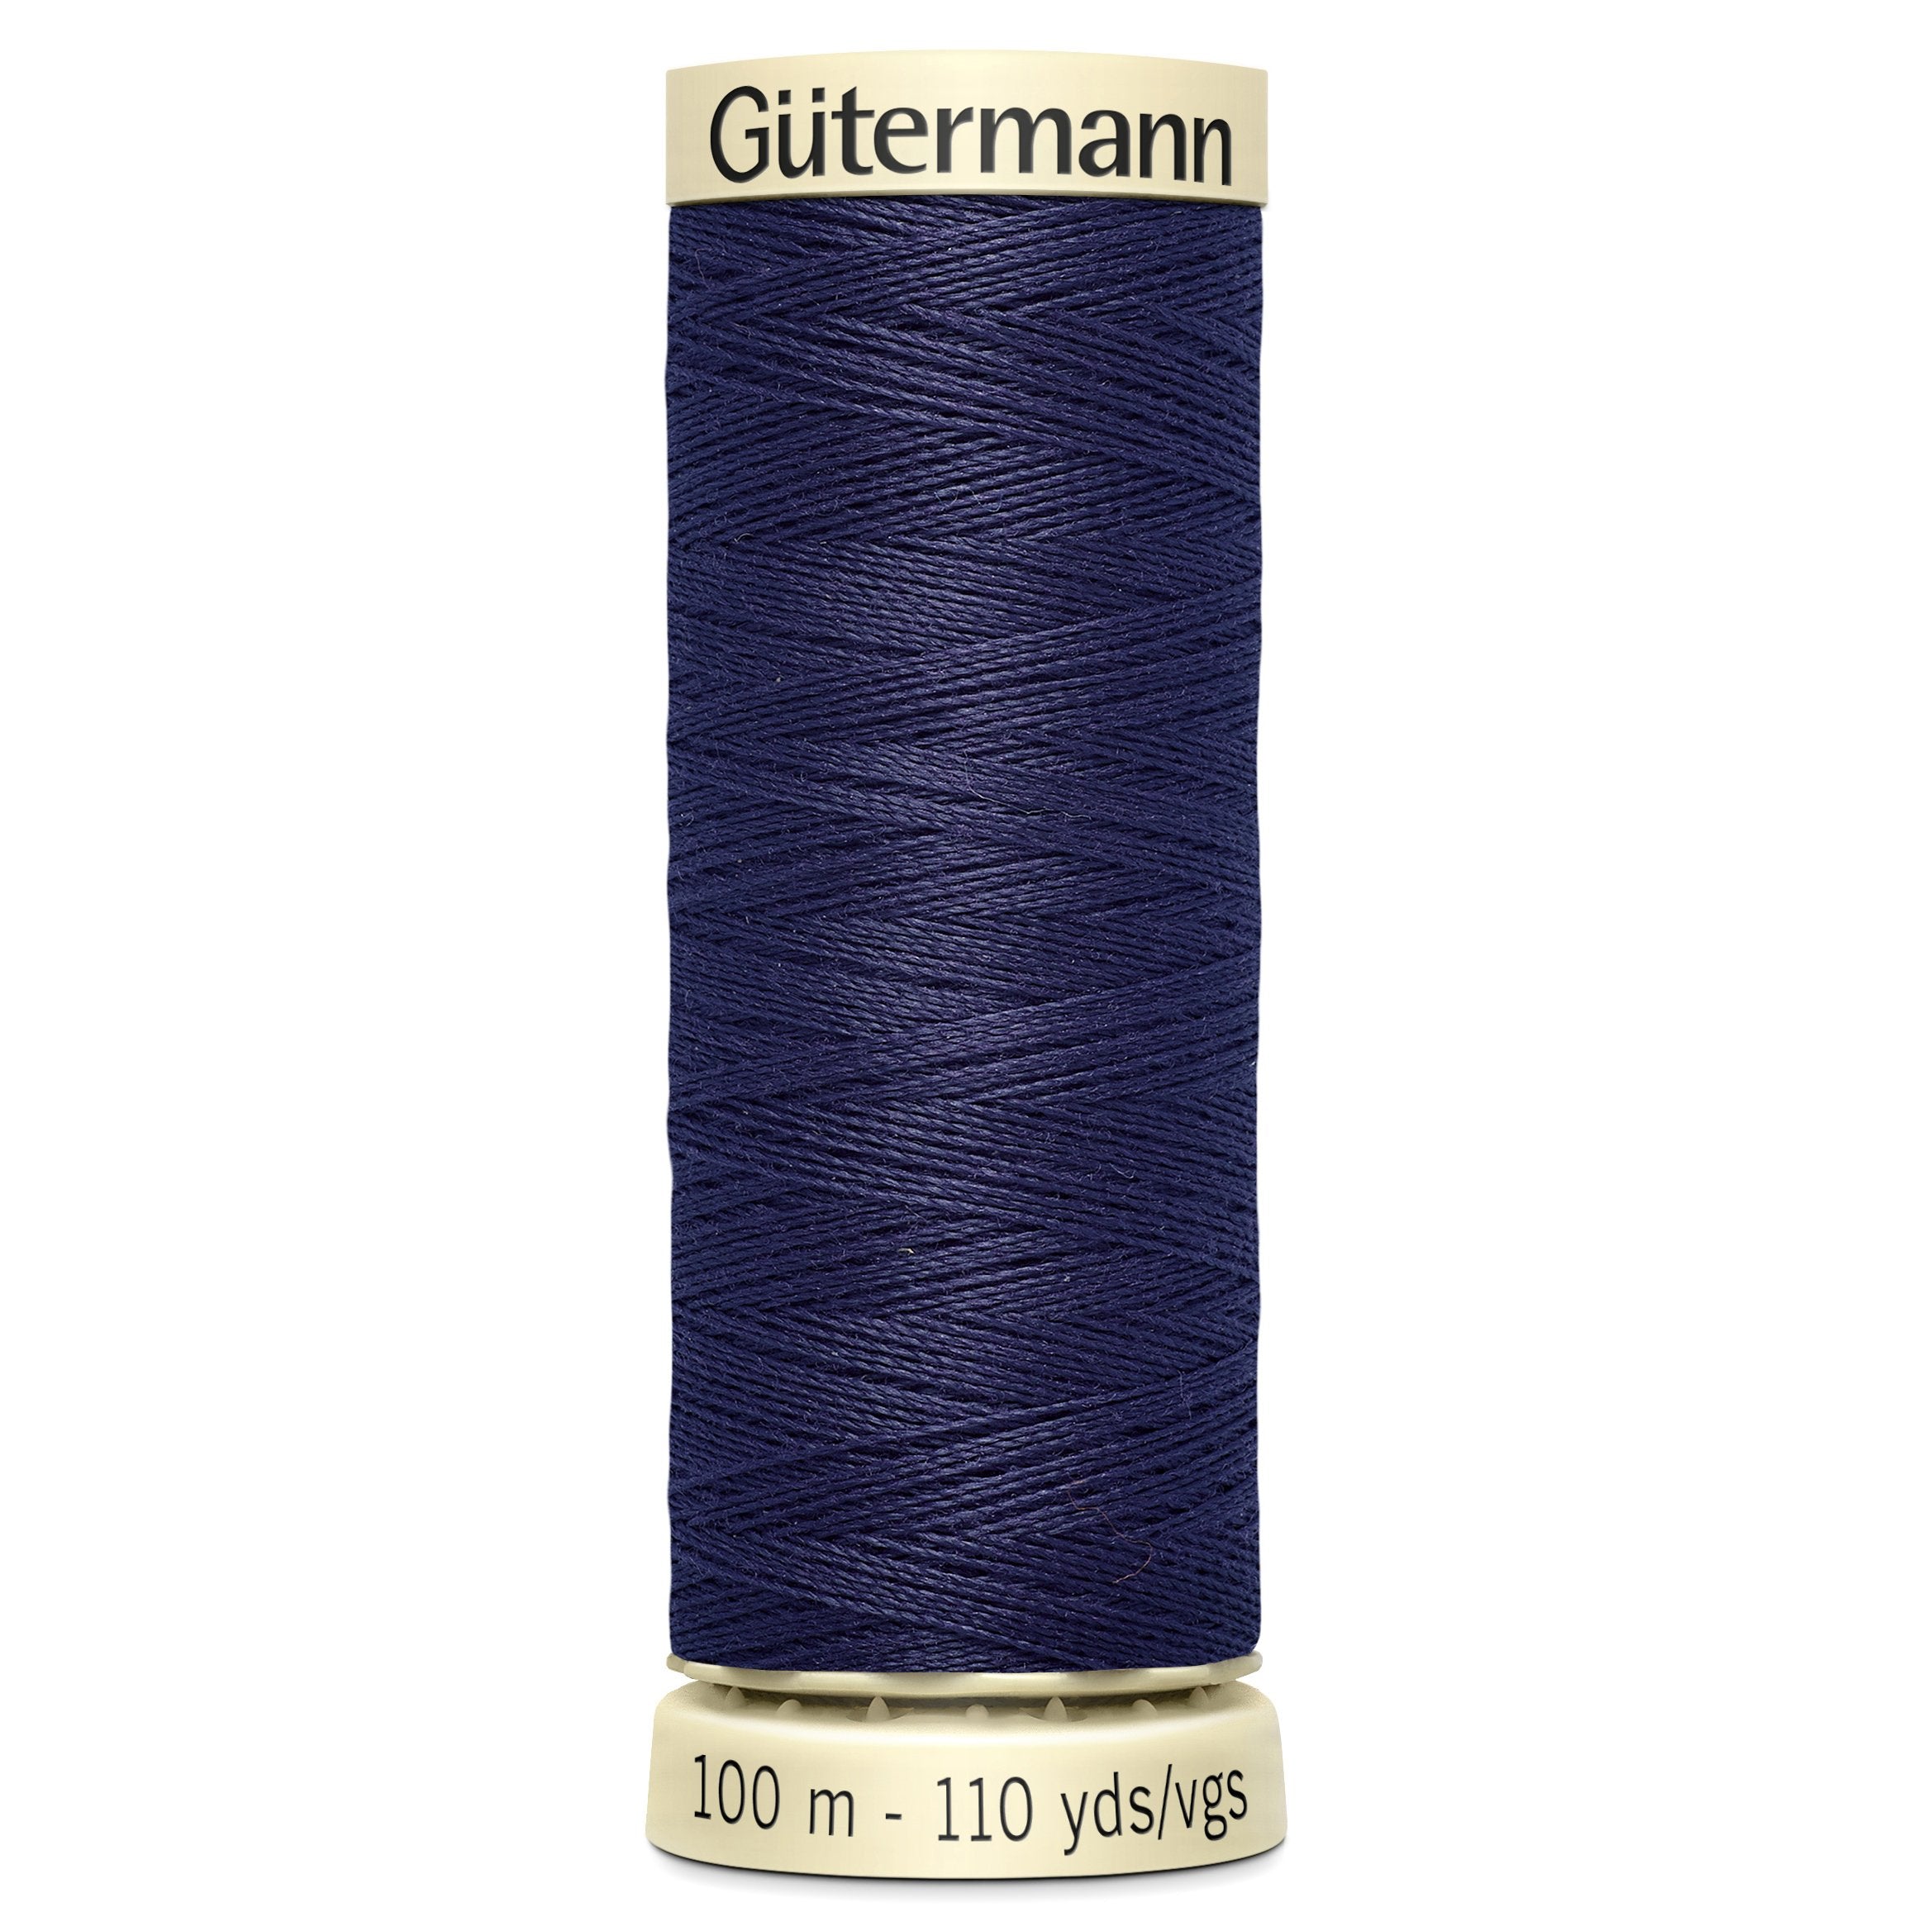 Gutermann Sew All Thread colour 575 Dusky Purple from Jaycotts Sewing Supplies